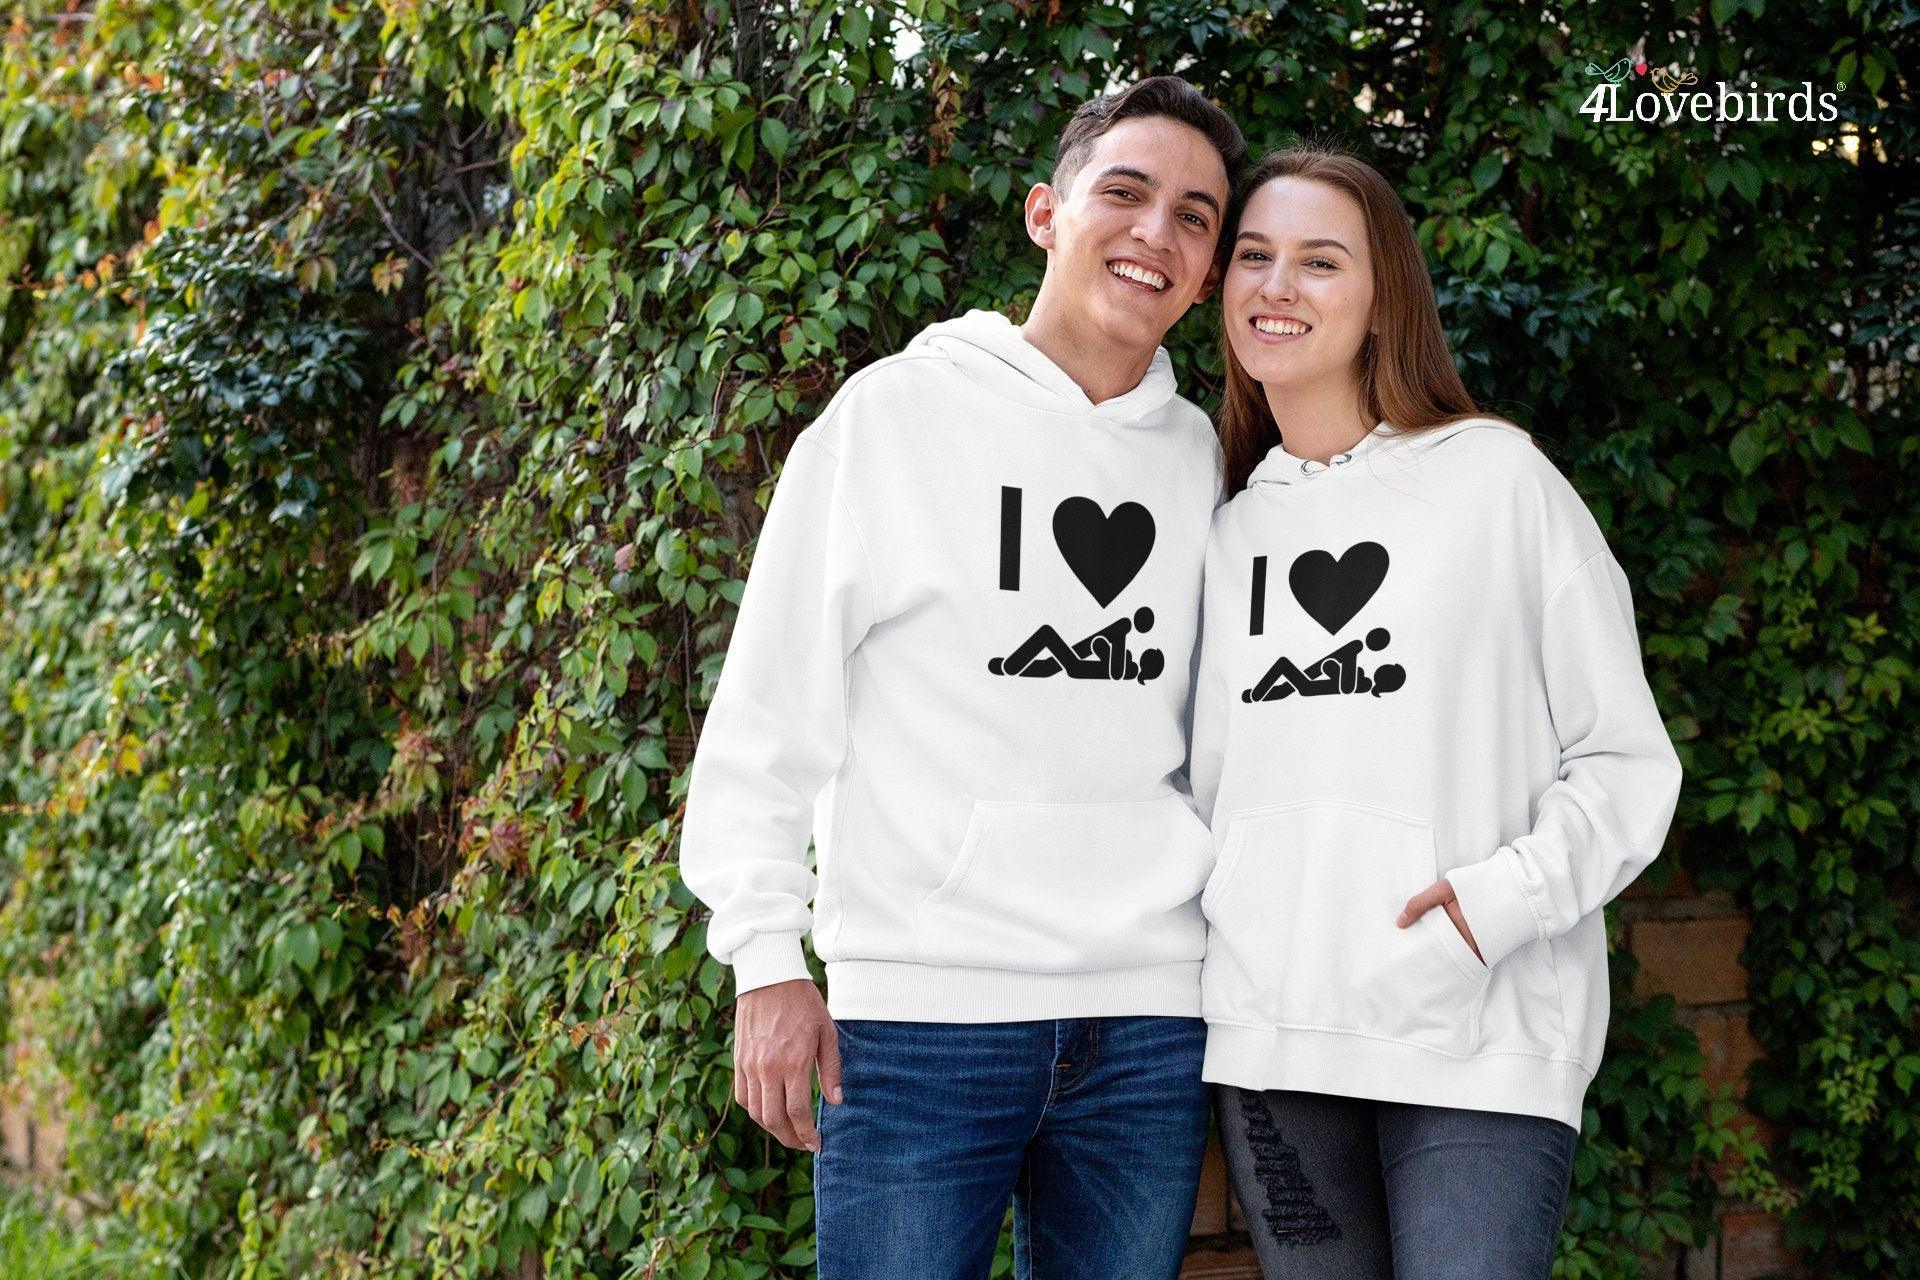 Stupid Lover Black Cute Matching Couple Gift Hoodies Pullover Top